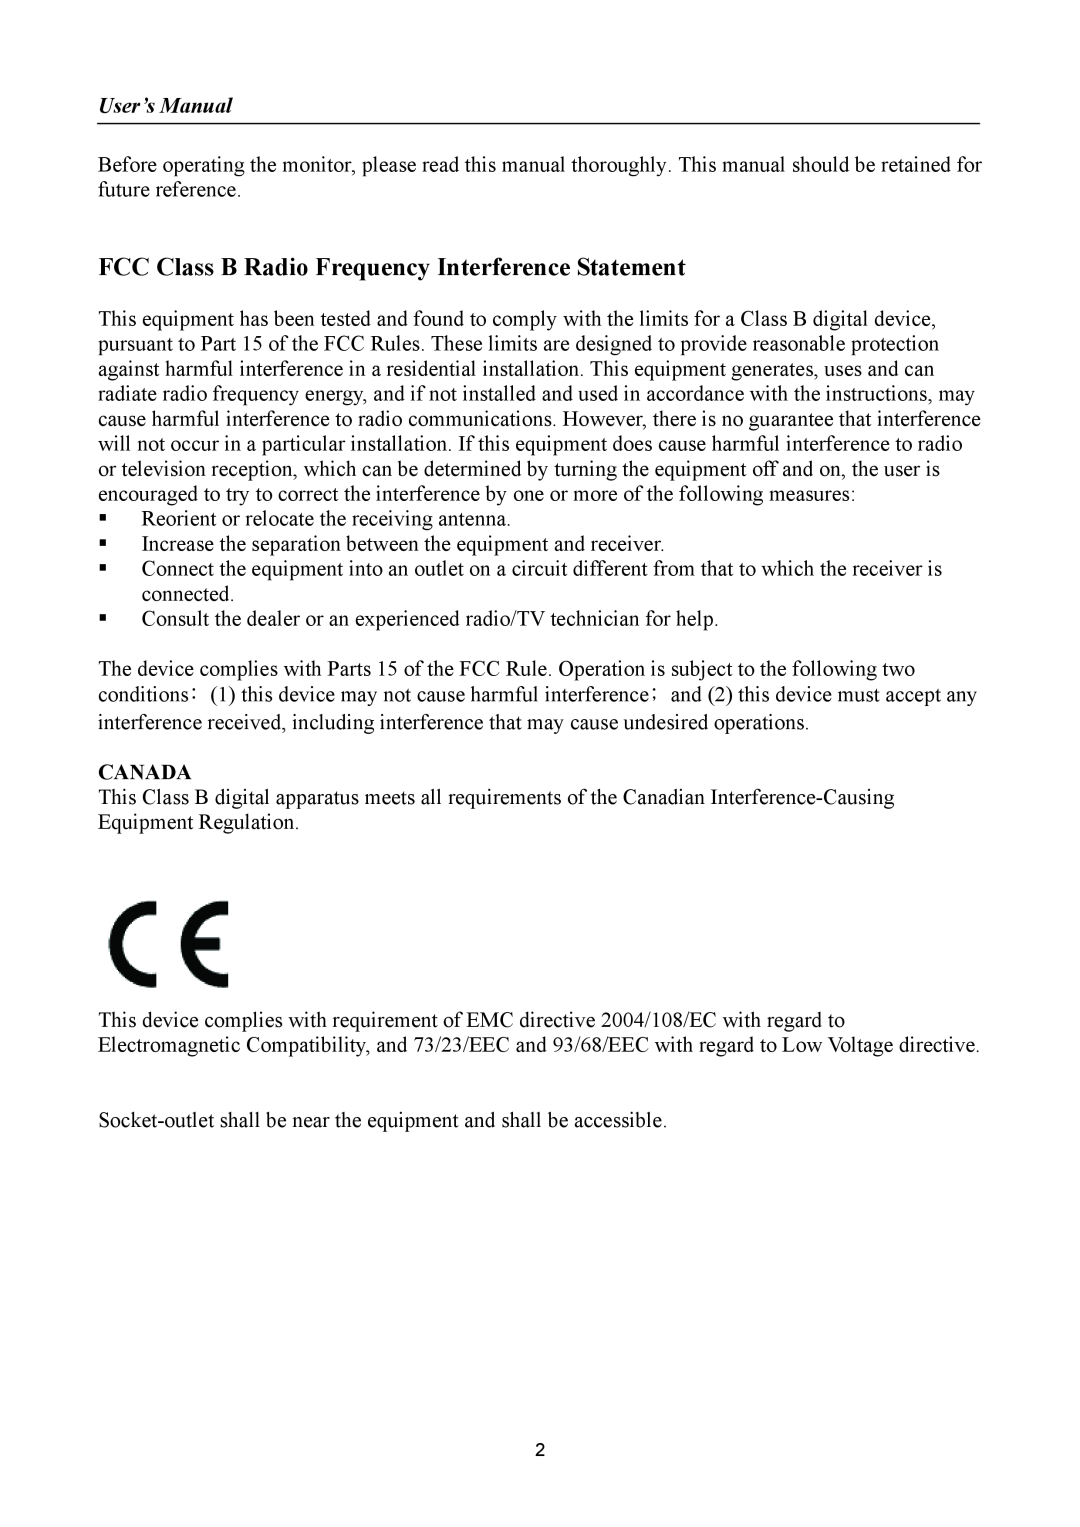 Hanns.G HH251 manual FCC Class B Radio Frequency Interference Statement, User’s Manual, Canada 